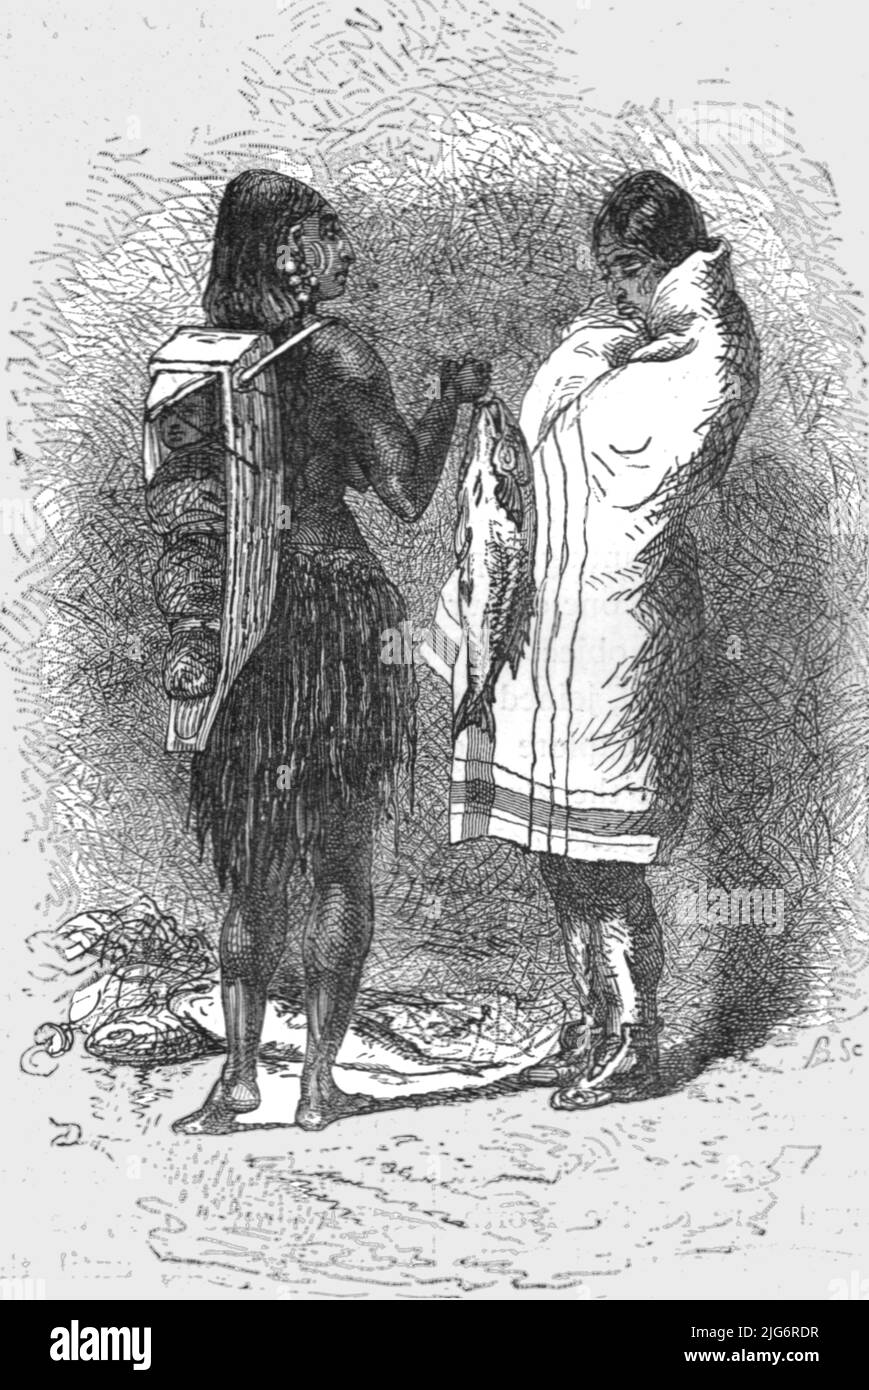 'Muchlaht Indians; In pawn in an Indian village', 1875. [The Mowachaht or Muchalaht are a people from the west coast of Vancouver Island in Canada]. From, 'Illustrated Travels' by H.W. Bates. [Cassell, Petter, and Galpin, c1880, London] Stock Photo